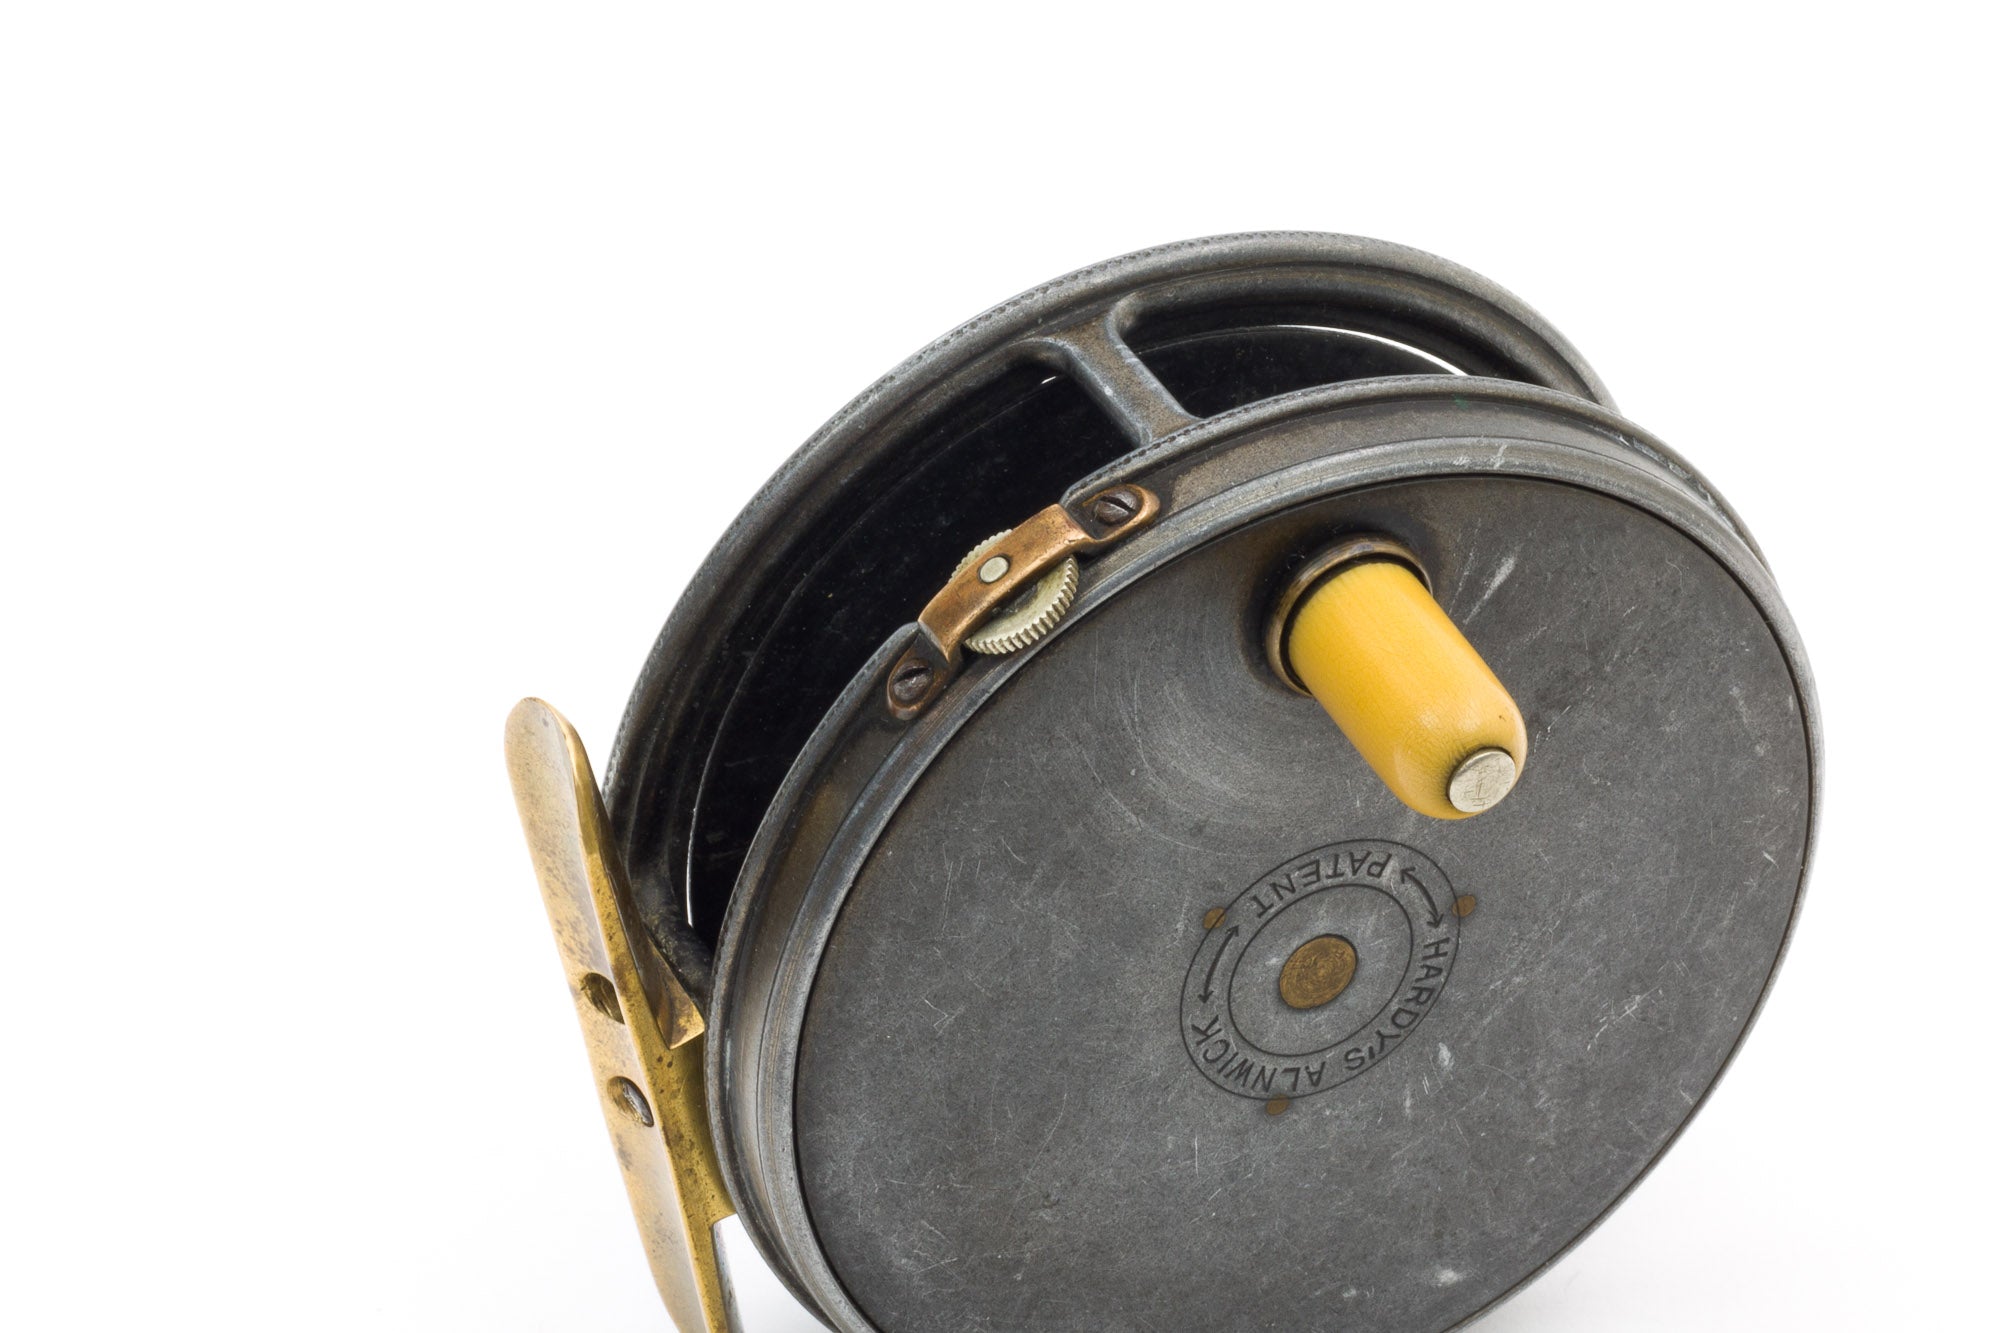 A Mitre Hardy The Jewel fly fishing reel, along with a Hardy's The